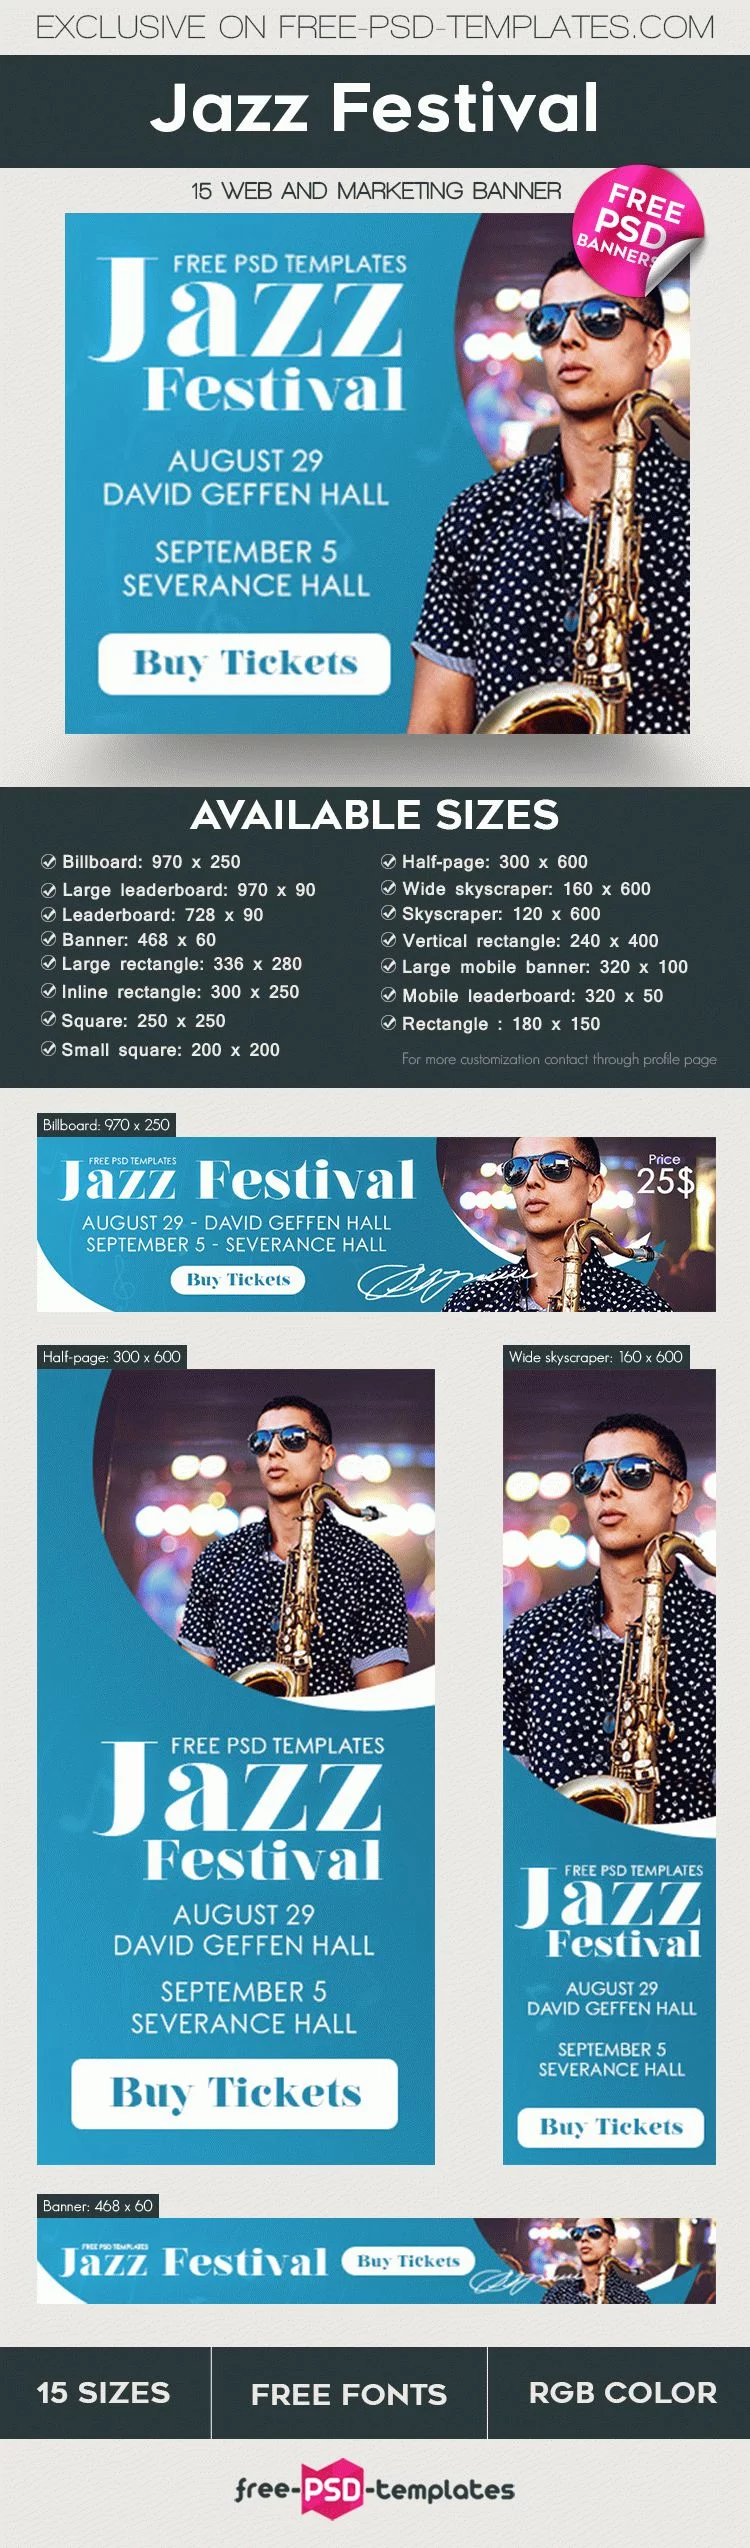 15 Free Jazz Festival Banners Collection in PSD